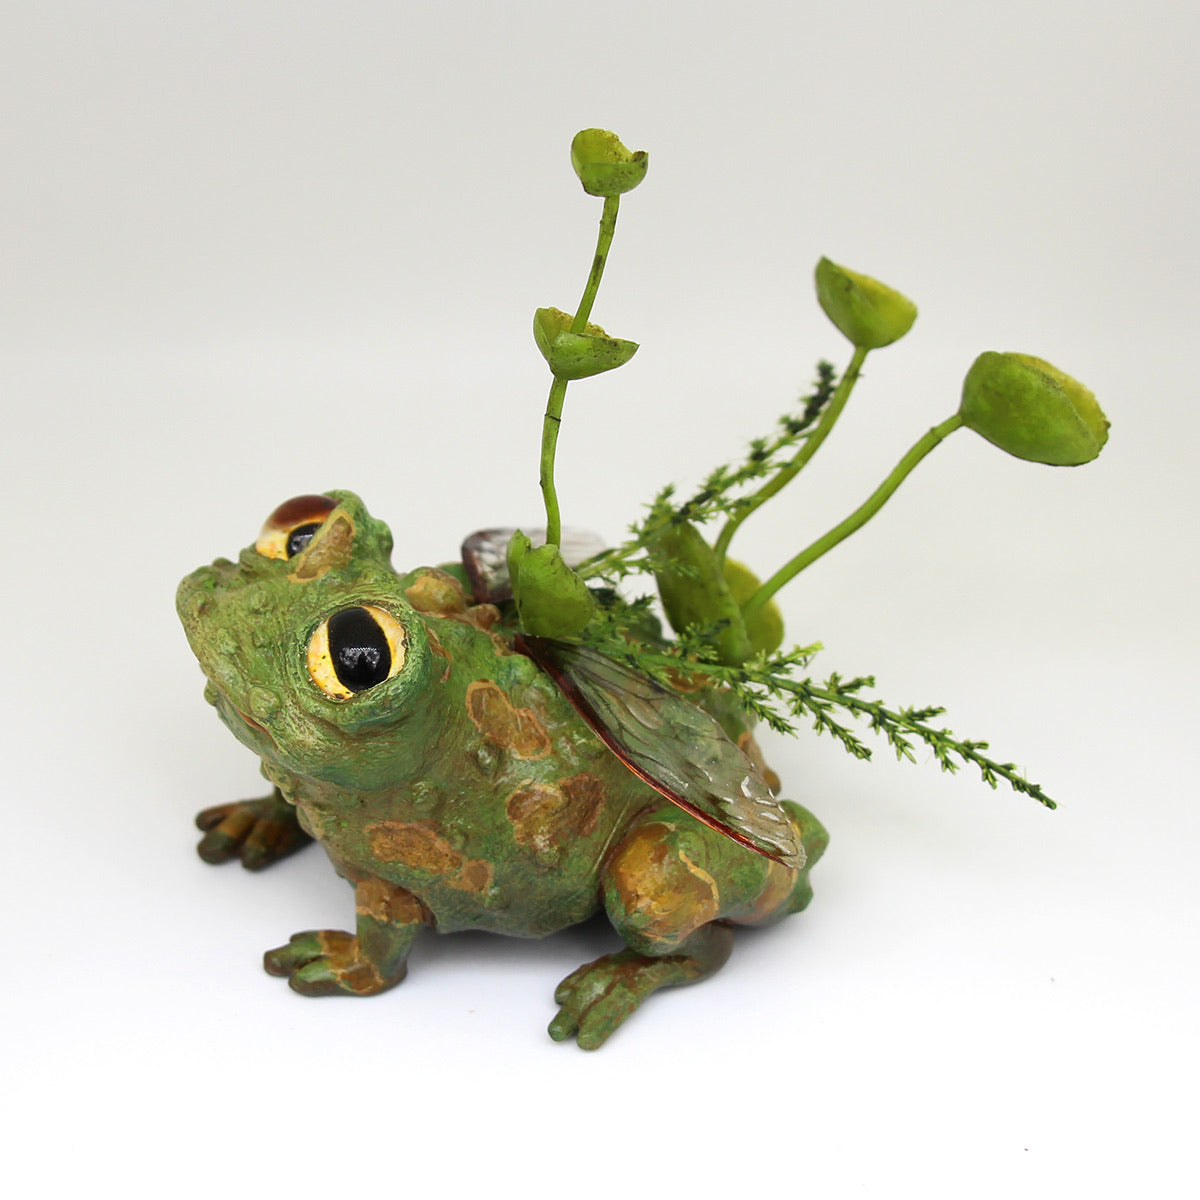 Toaby the Faerie Toad